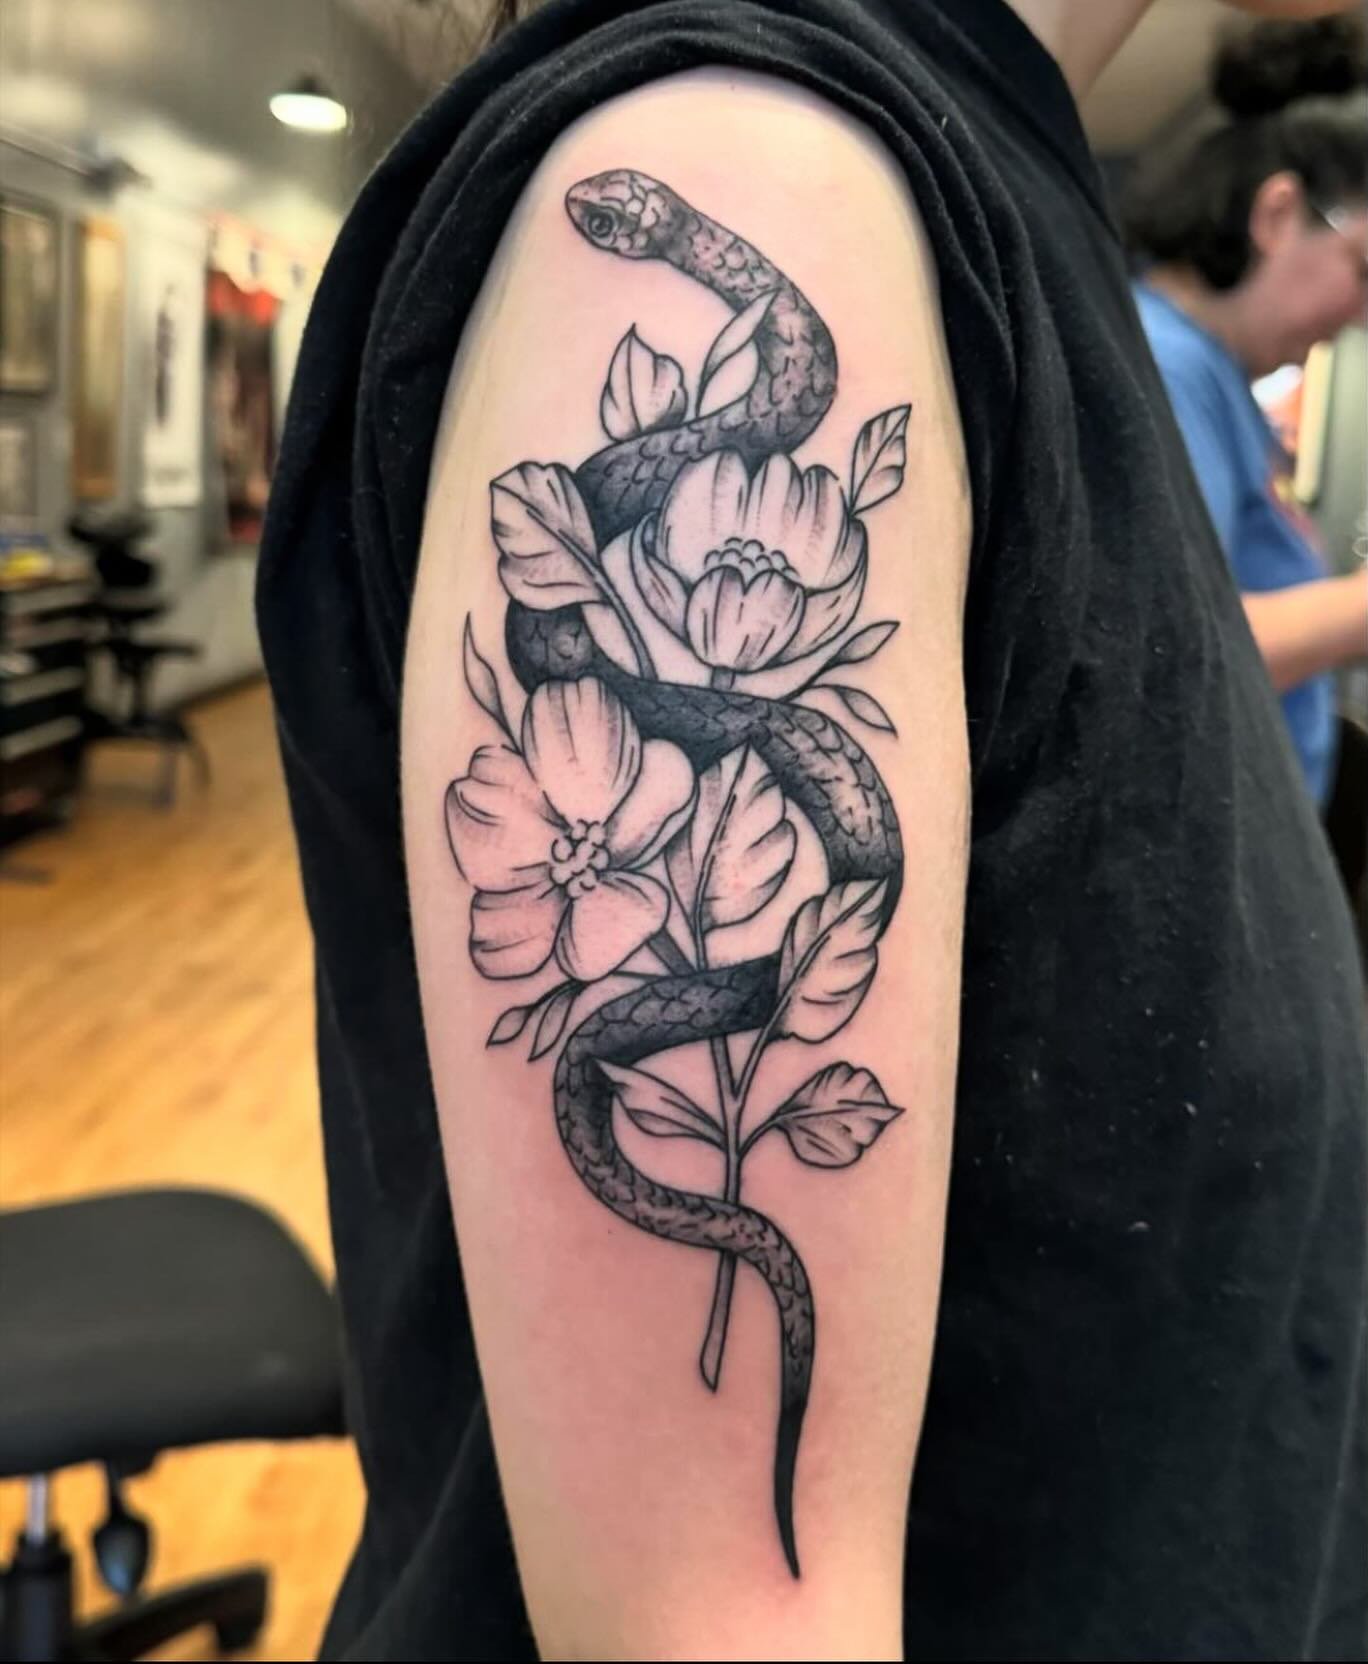 Tattoo by Tanner, @twangsaw At @twosonstattoo we do all styles, all good! Whatever you want, Mon-Sat 12-8. We book appointments and take walk-ins on a first come, first served basis. Real street shop tattooing in Cleveland @twosonstattoo @twosonstatt